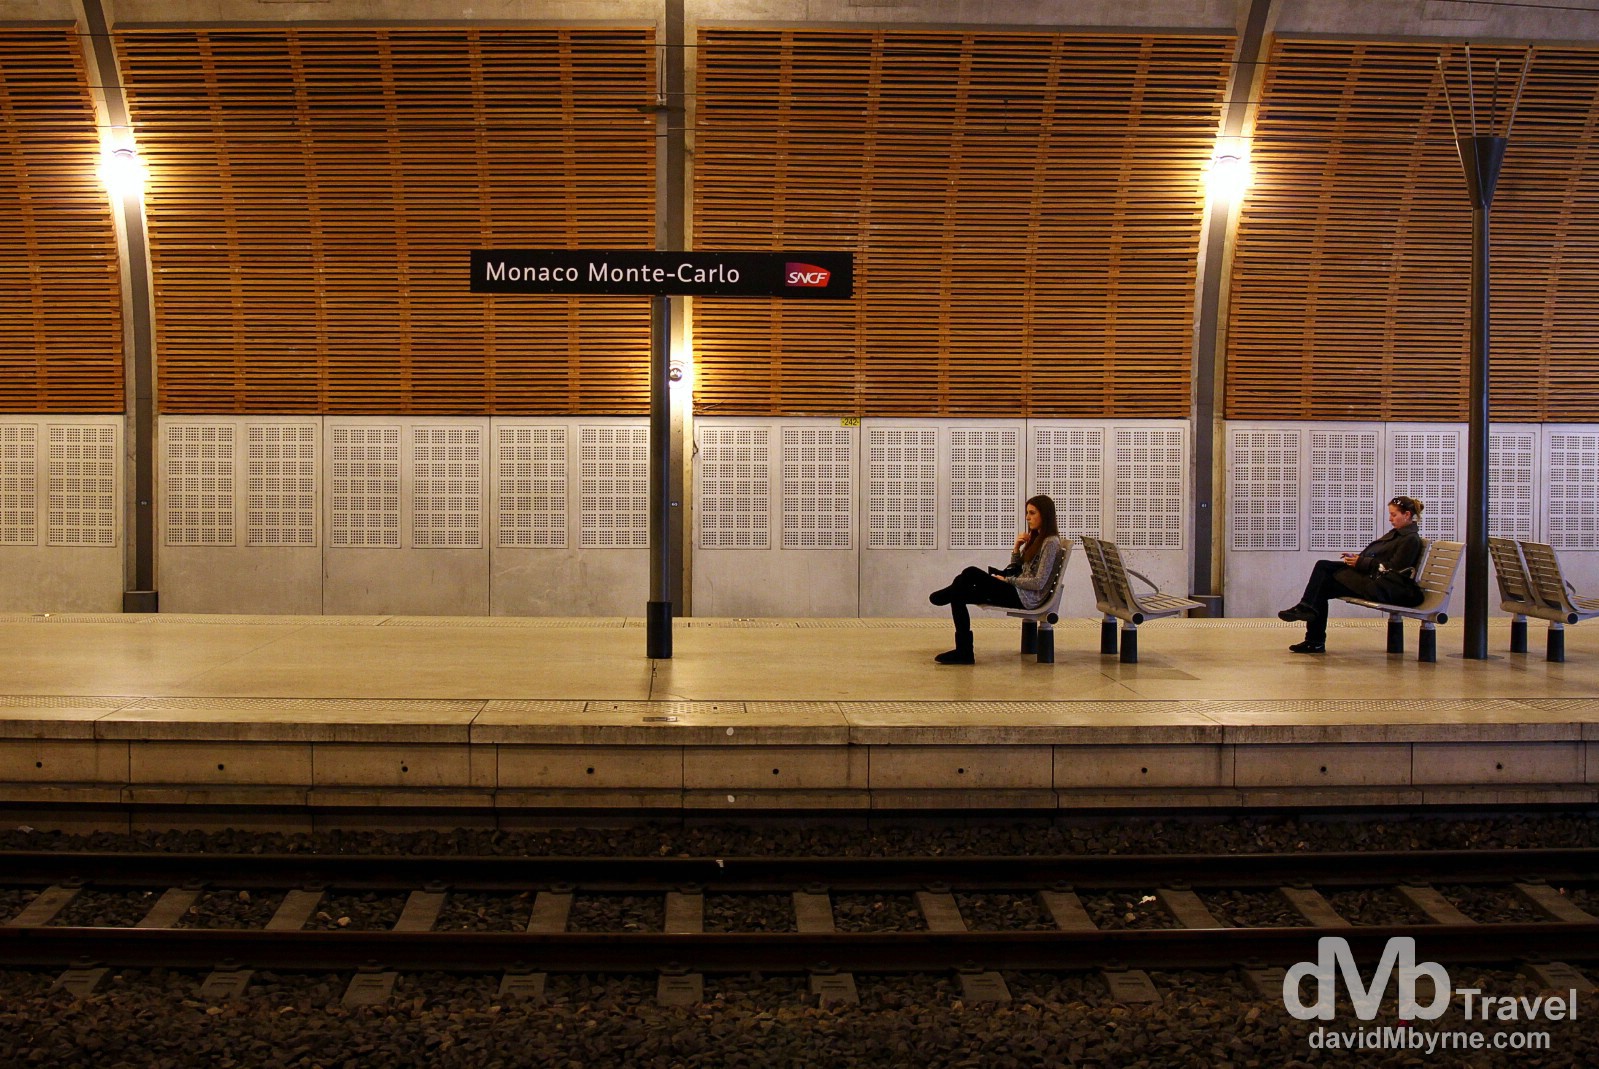 On the platform of the subterranean train station platform in Monaco. March 14th, 2014.